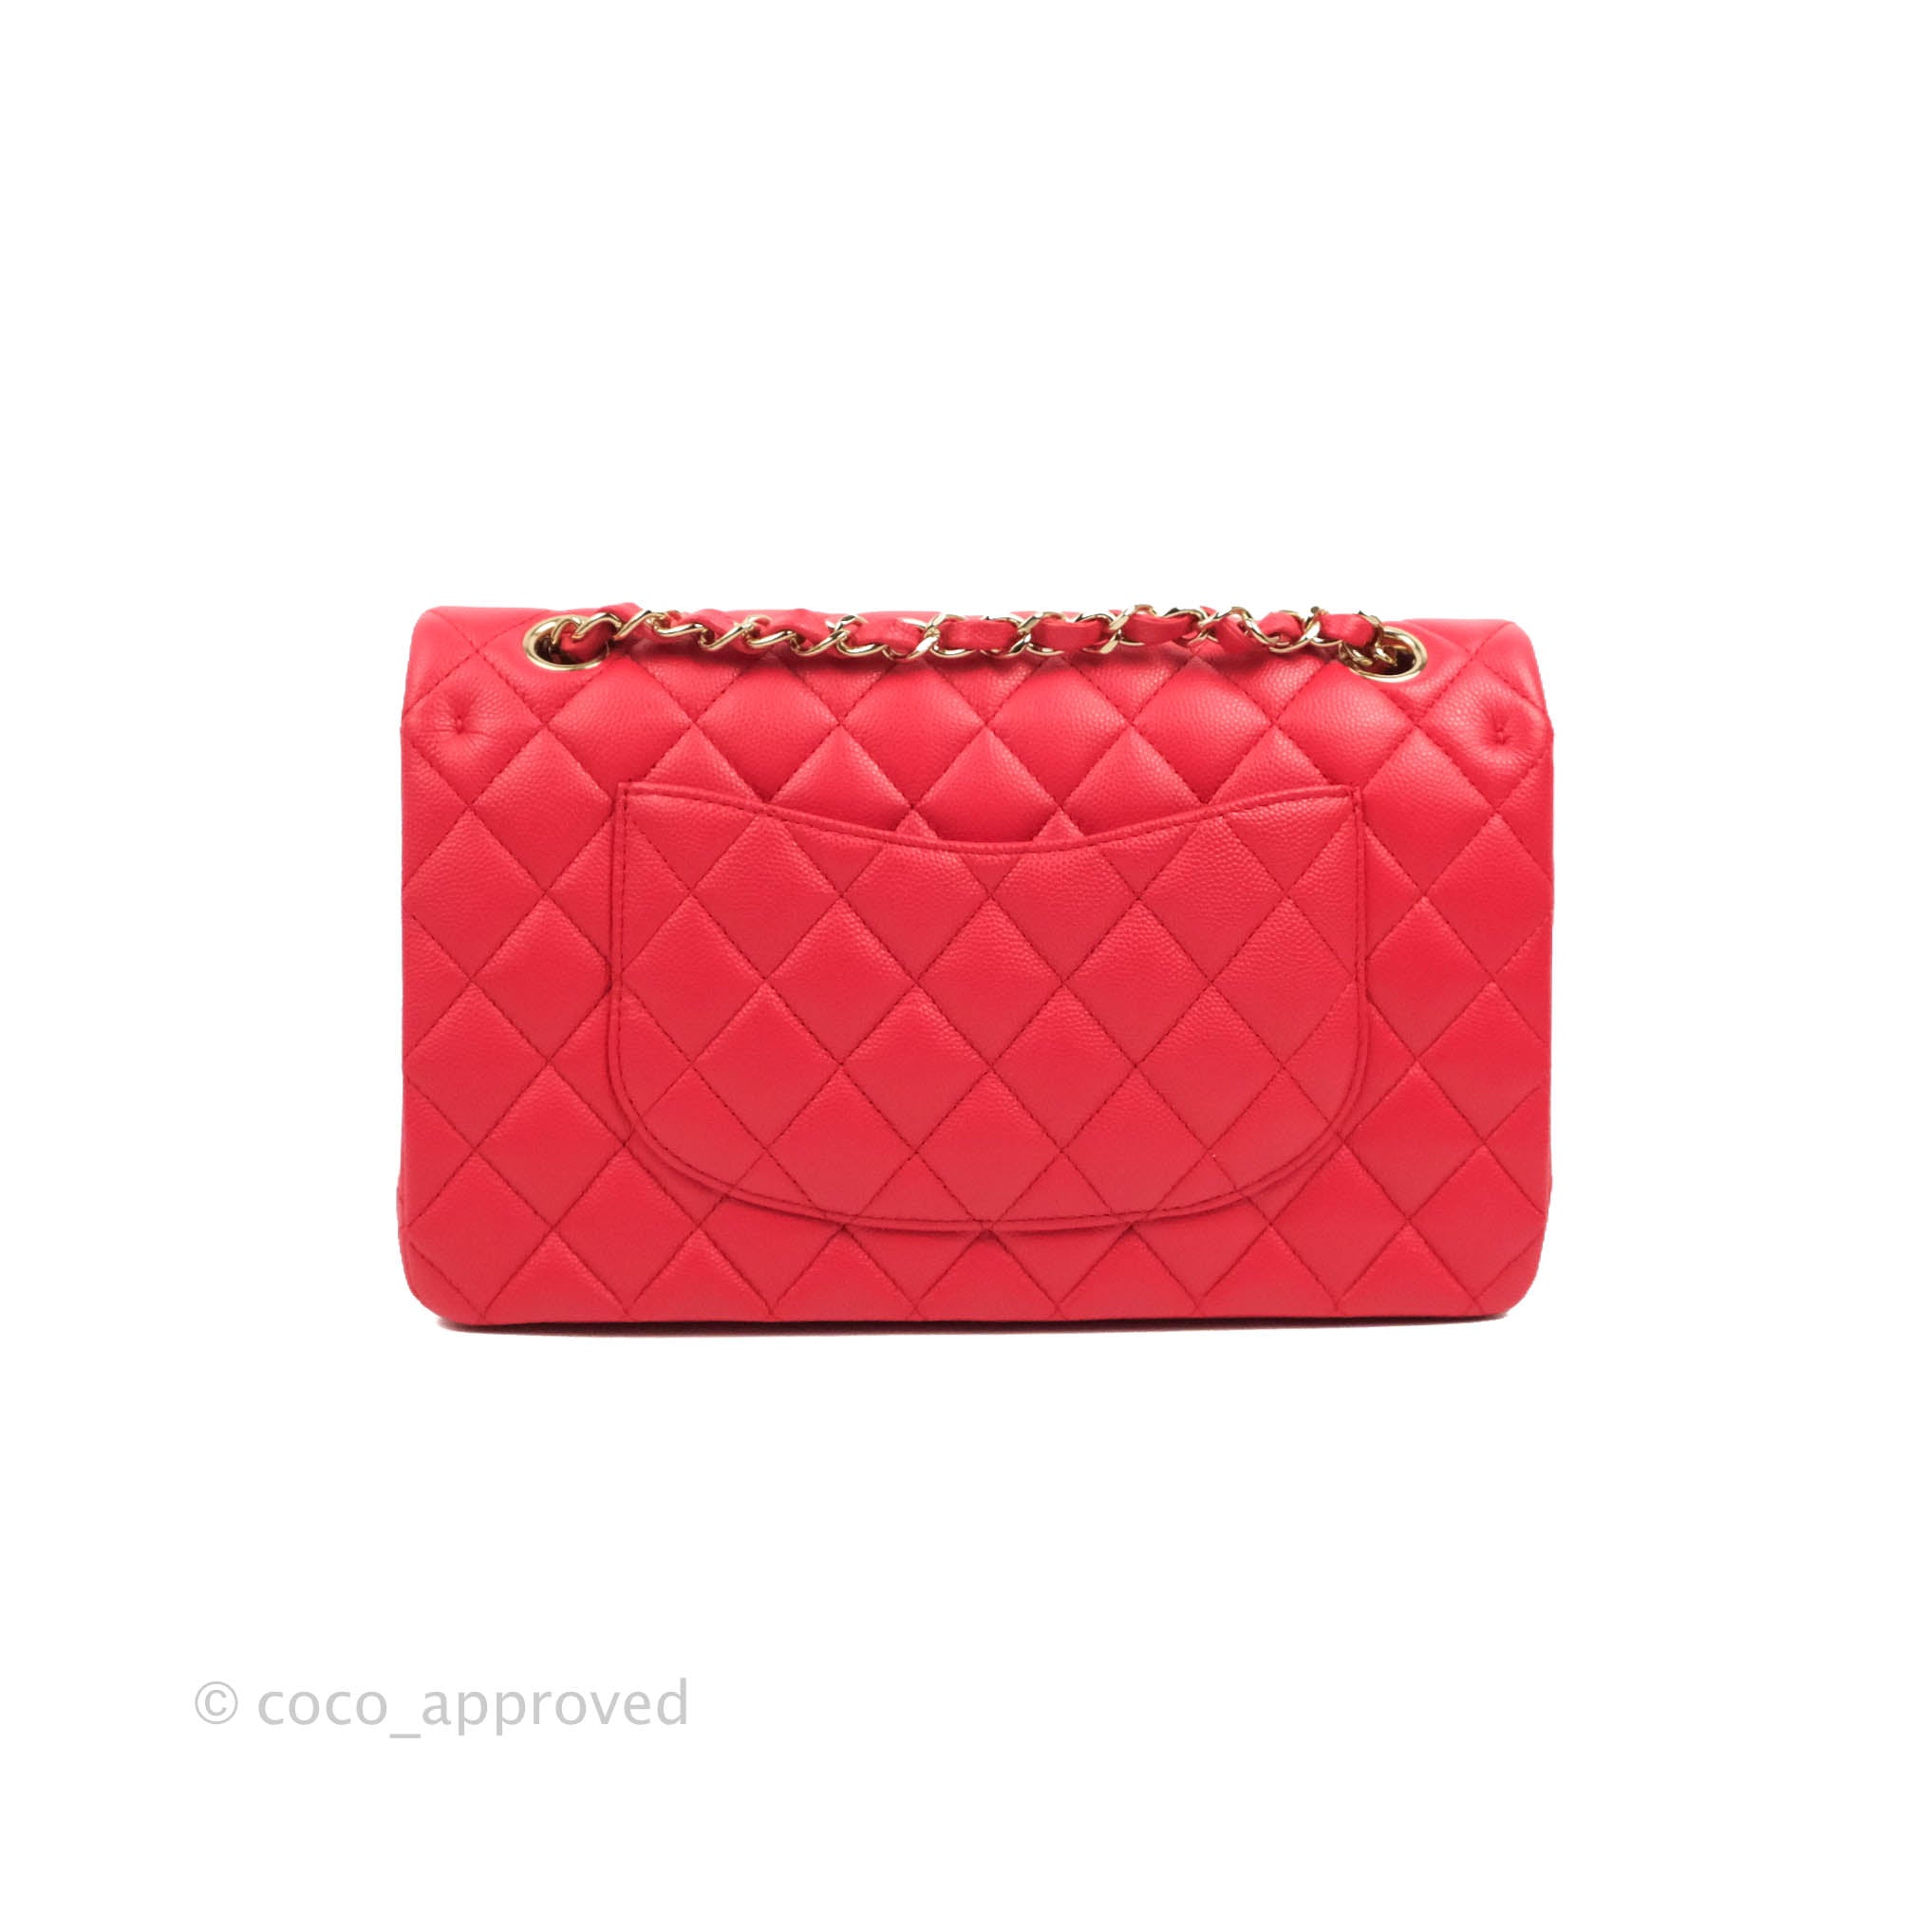 Authentic CHANEL Cherry Red Caviar Double Flap Bag  Valamode